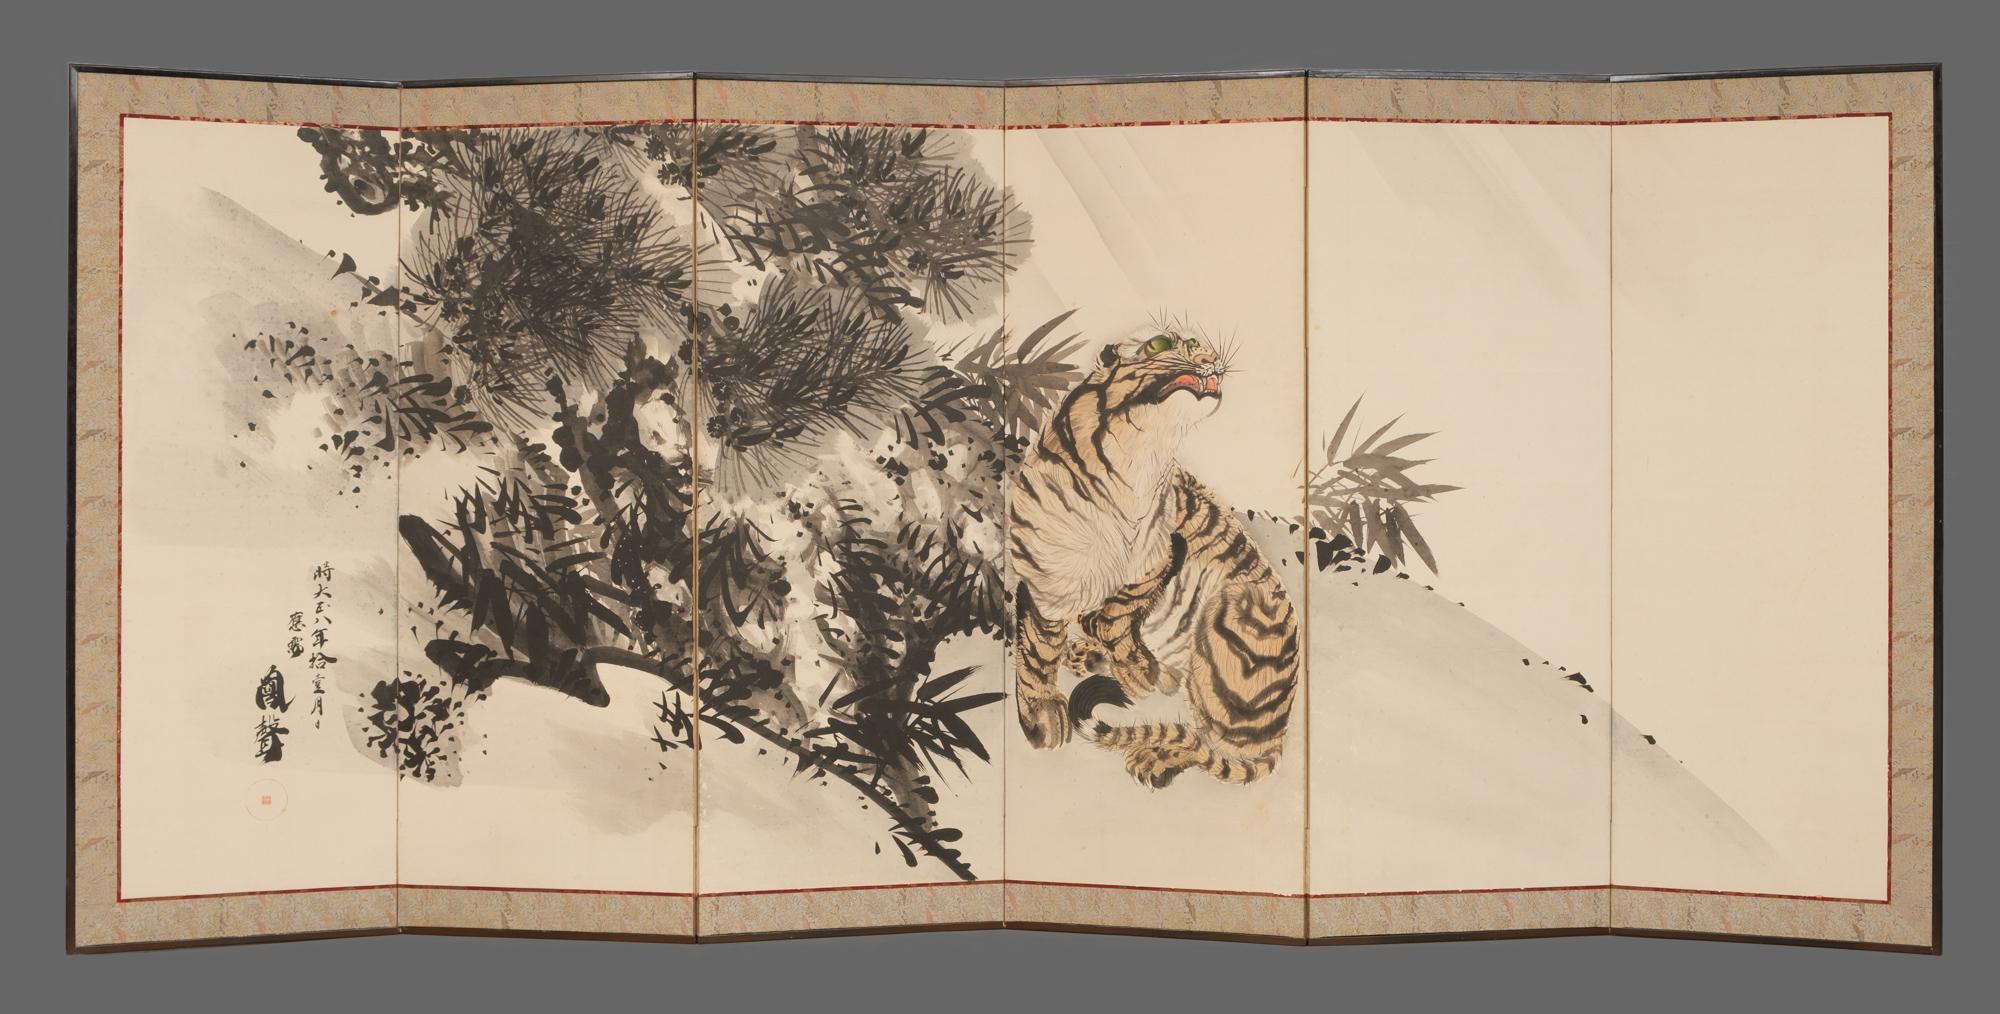 A pair of exquisite, large six-panel byôbu (room divider) featuring paintings in black ink of the iconic pairing of a tiger (tora) and a dragon (ryû).

The screen on the left shows a tiger sitting at the brink of a rugged, foliage-covered hill,